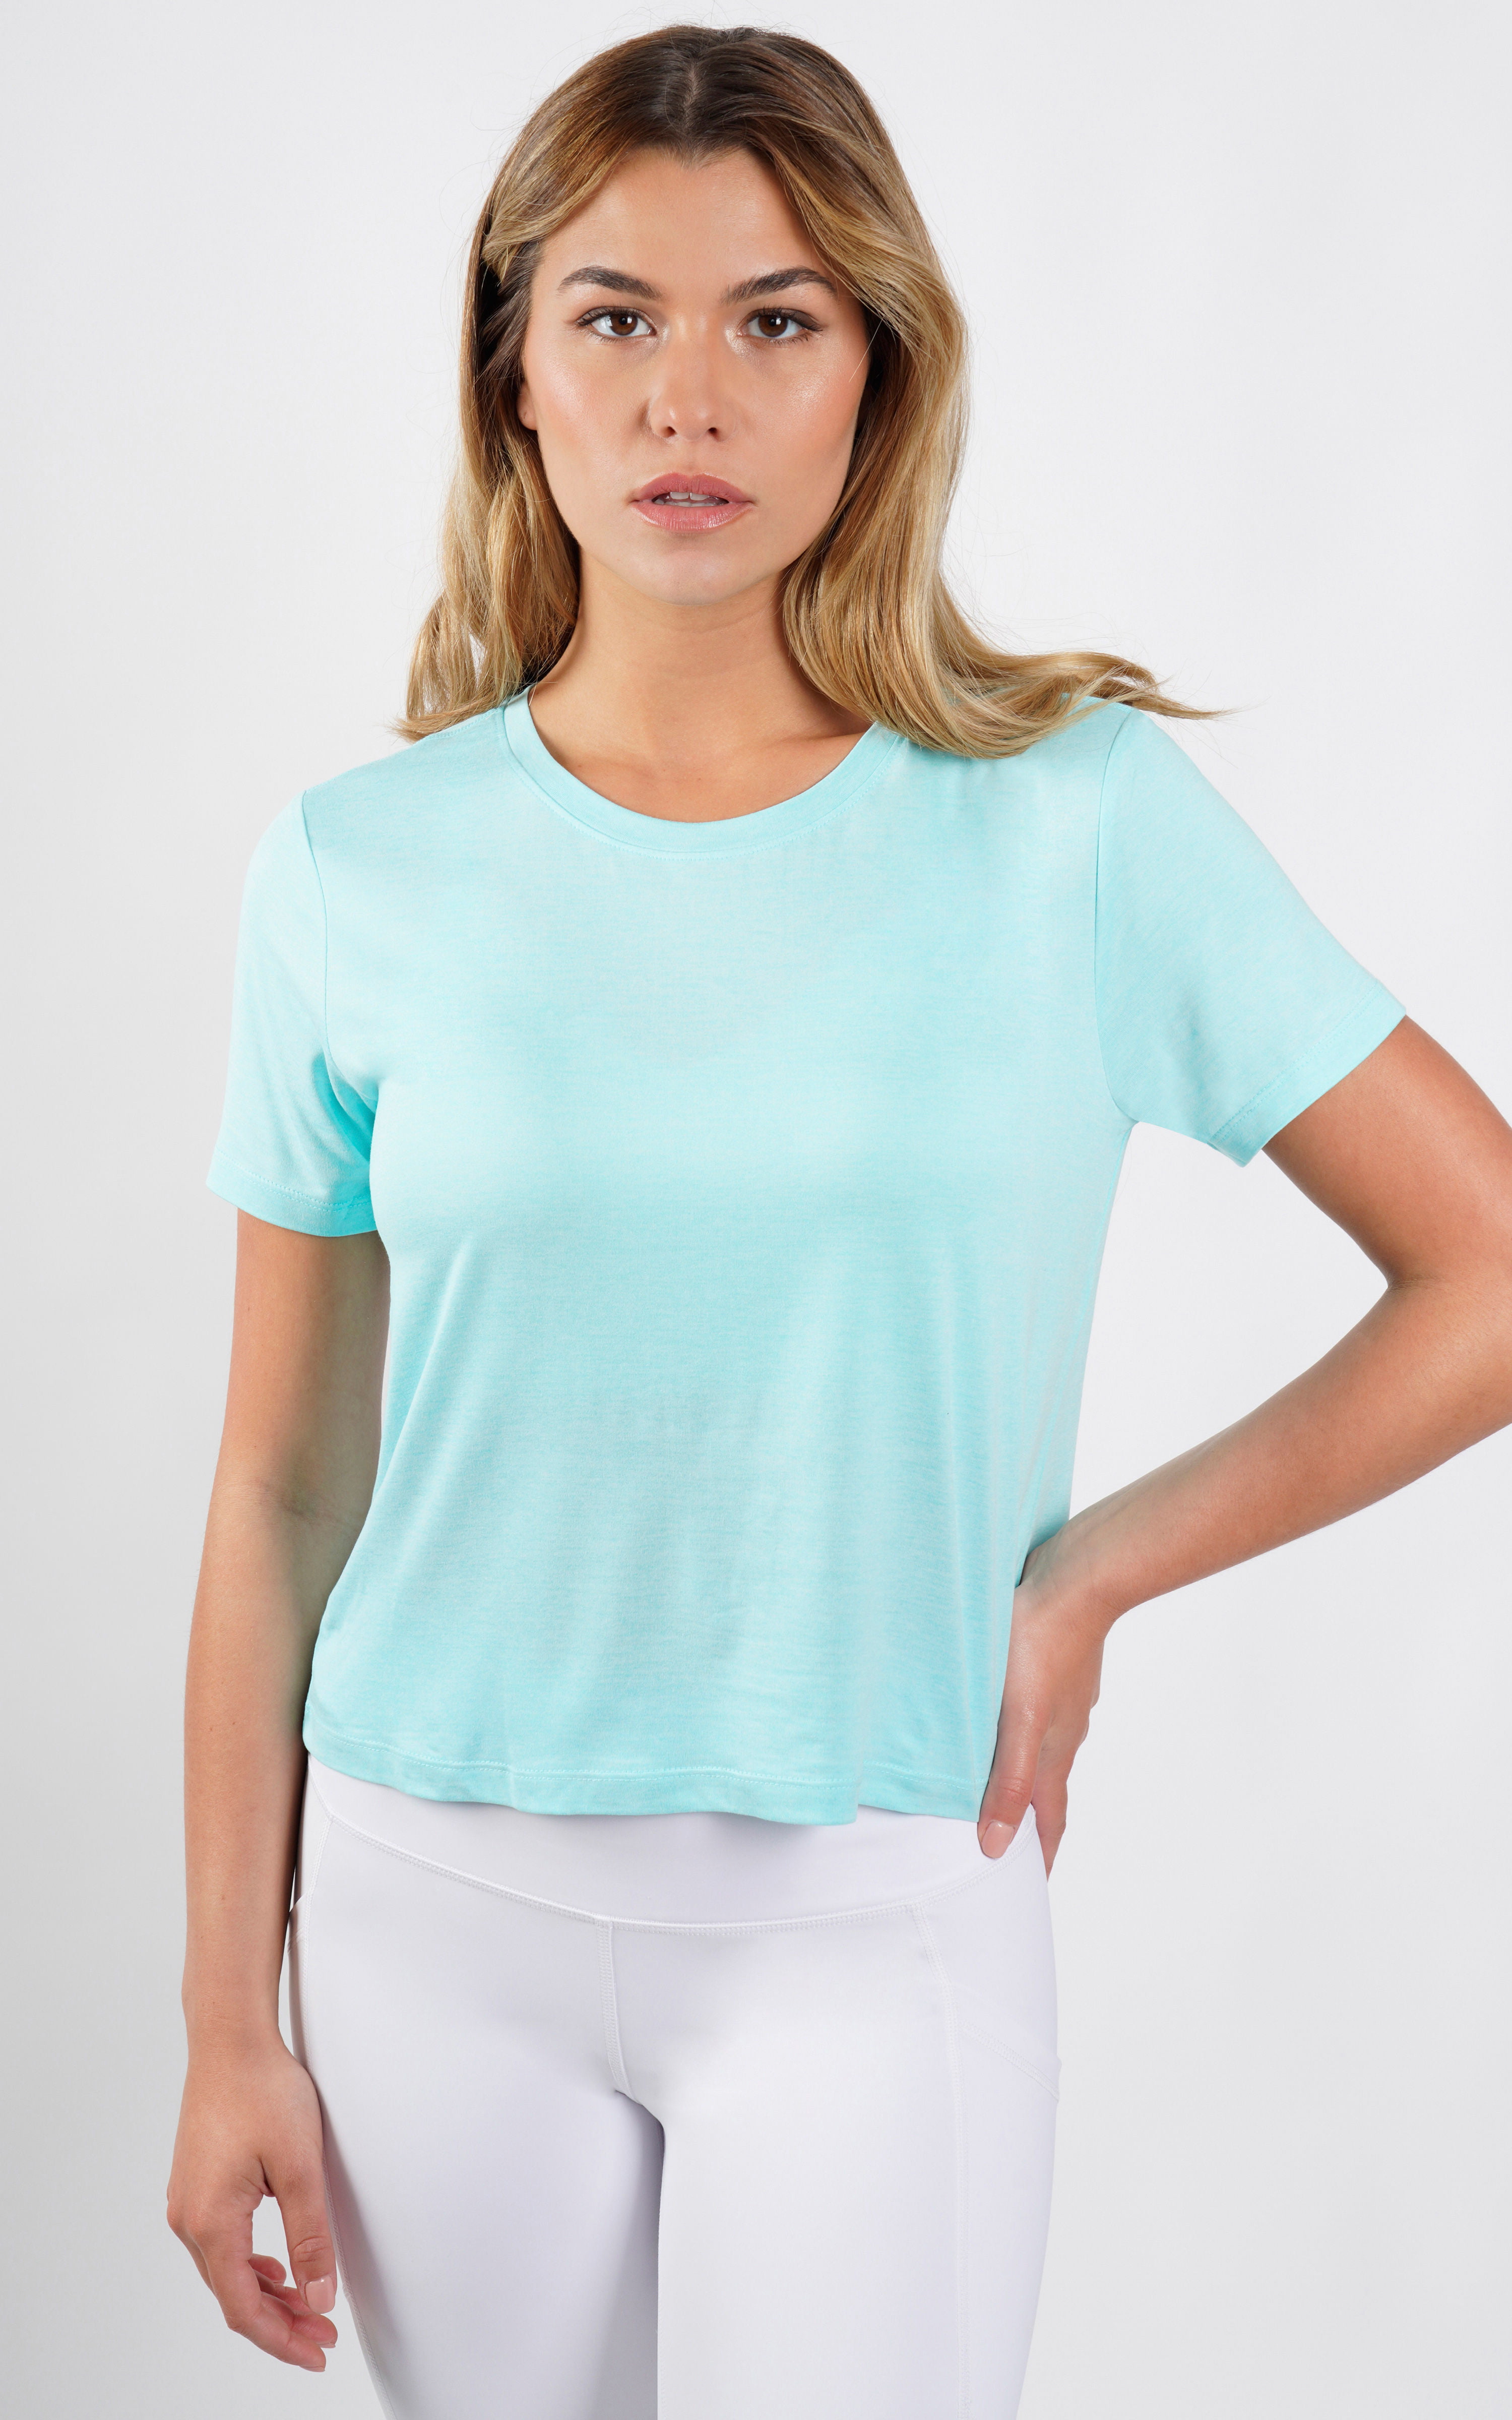 Yogalicious Women's Short Sleeve Cropped Top 